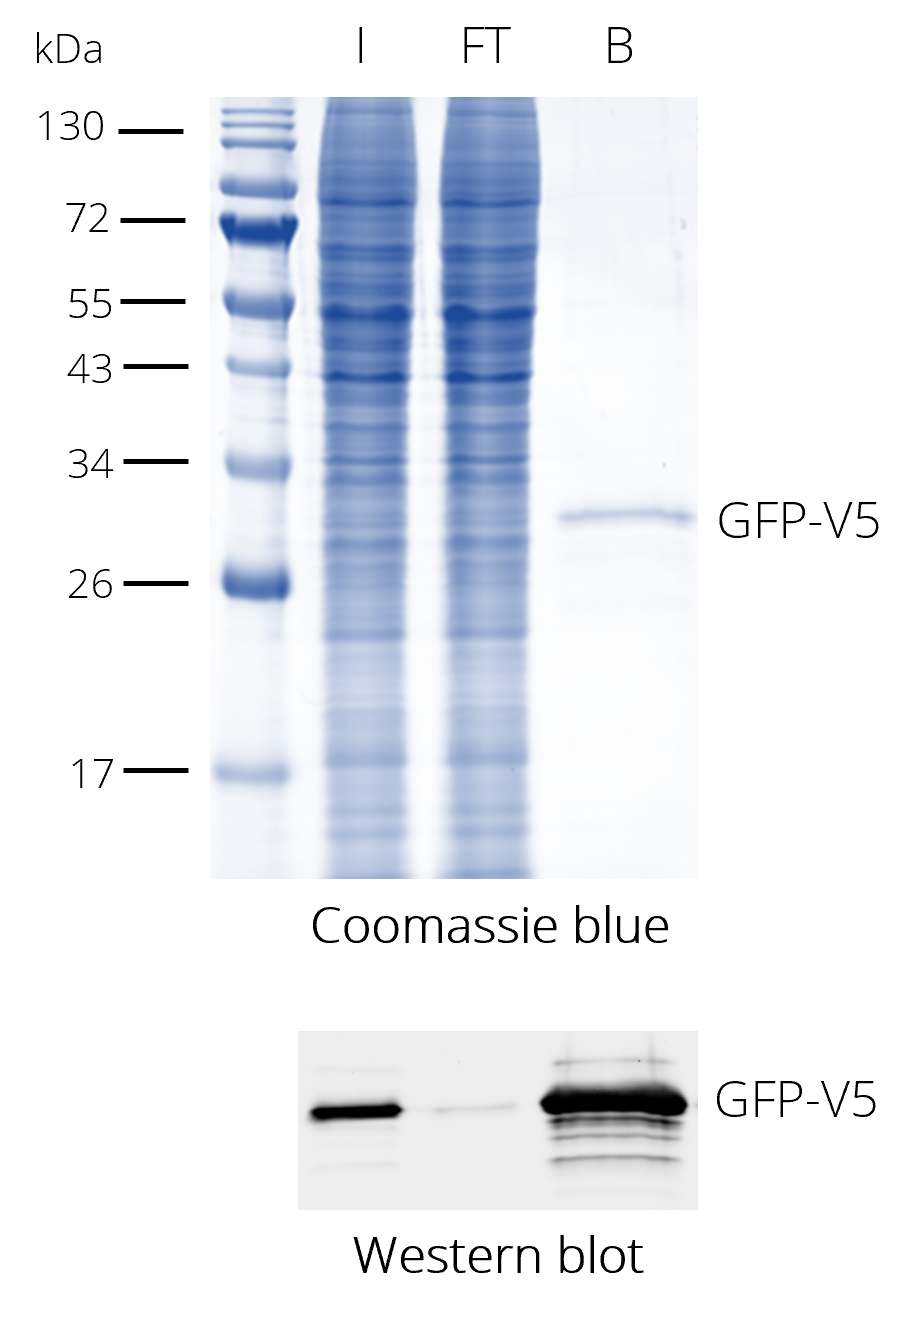 Pulldown of V5-tagged protein (V5-tag at C-terminus) with V5-Trap® Magnetic Agarose beads, Coomassie and Western blot. Western blot: V5-tag antibody [SV5-P-K], monoclonal mouse IgG1 kappa and anti-mouse IgG1 Nano-Secondary Alexa Fluor® 488 I: input, FT: Flow-through, B: Bound.